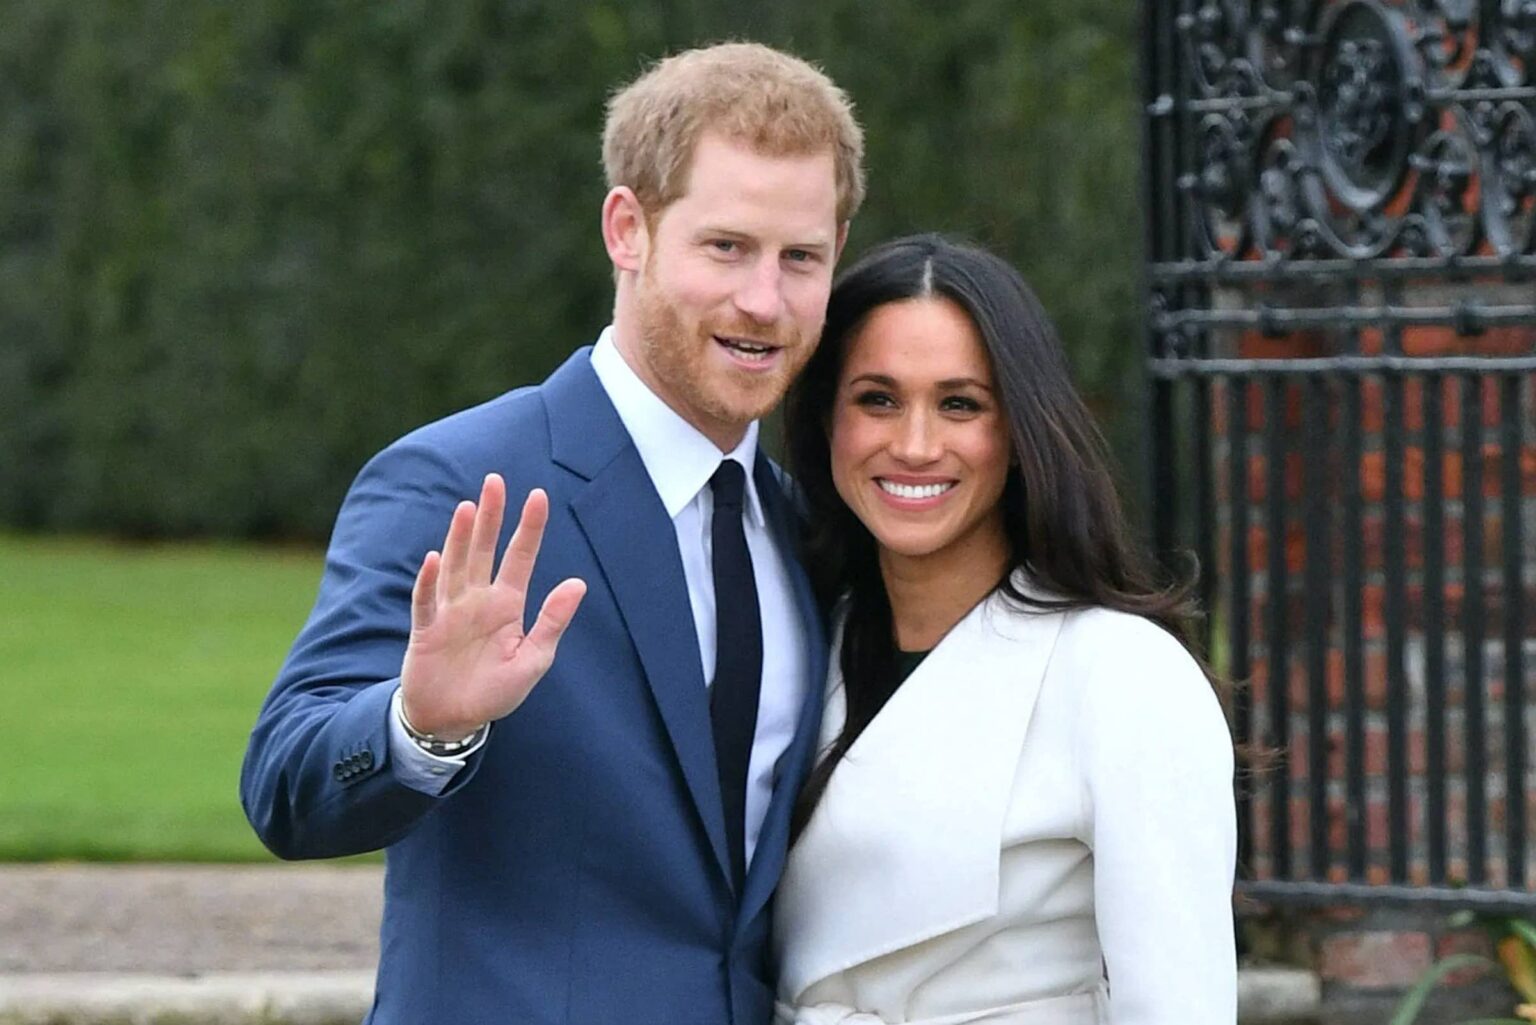 How much money will the Netflix deal with Prince Harry and Meghan Markle cost? Discover if their Netflix deal will help pay their bills.